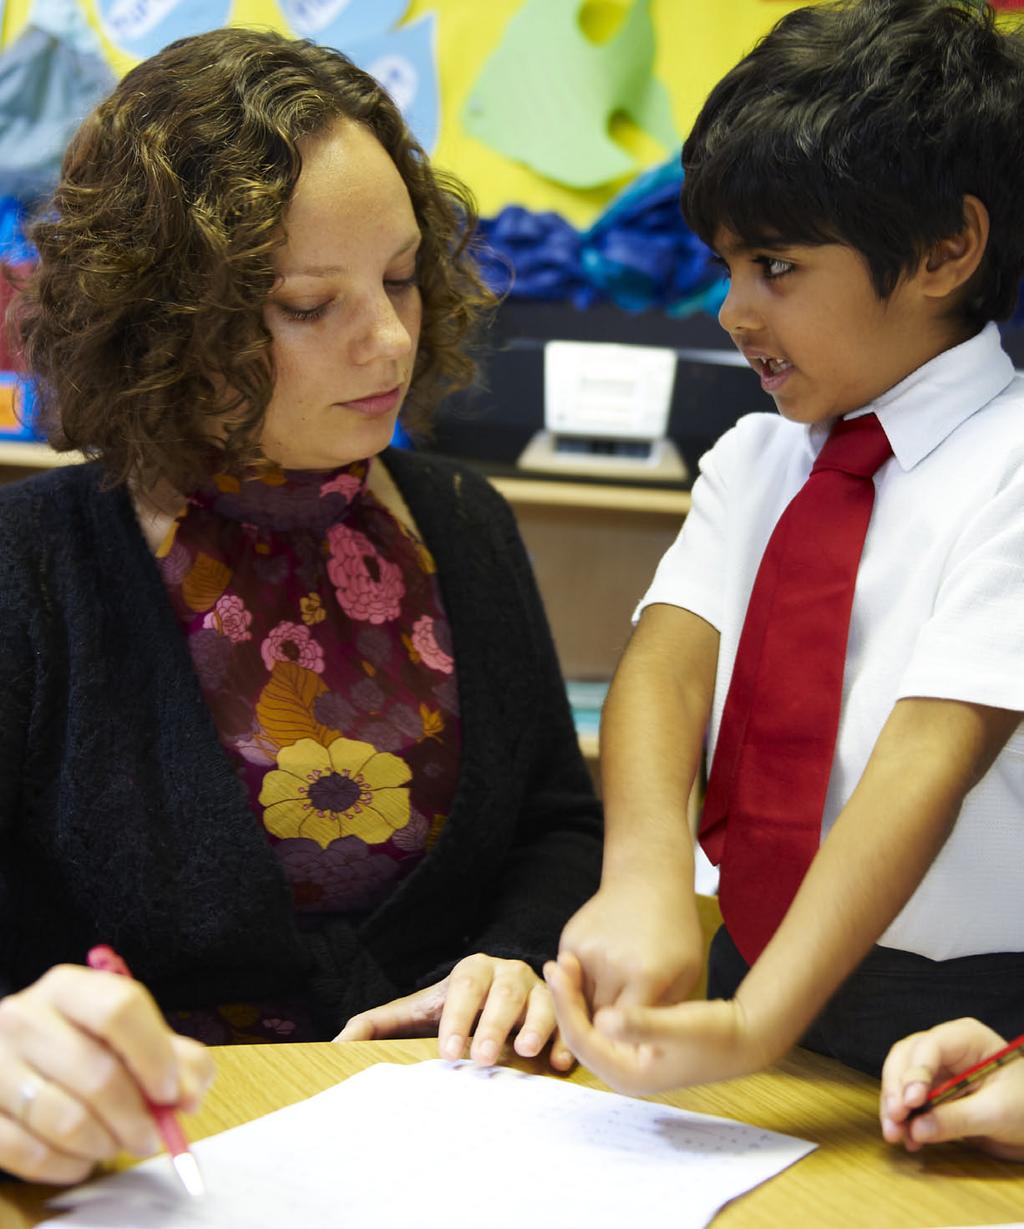 The excellent in-house specialist team are able to offer advice, and specialist tuition can be provided where necessary in areas of Maths, Literacy Skills, Speech and Language and Visual Perceptual